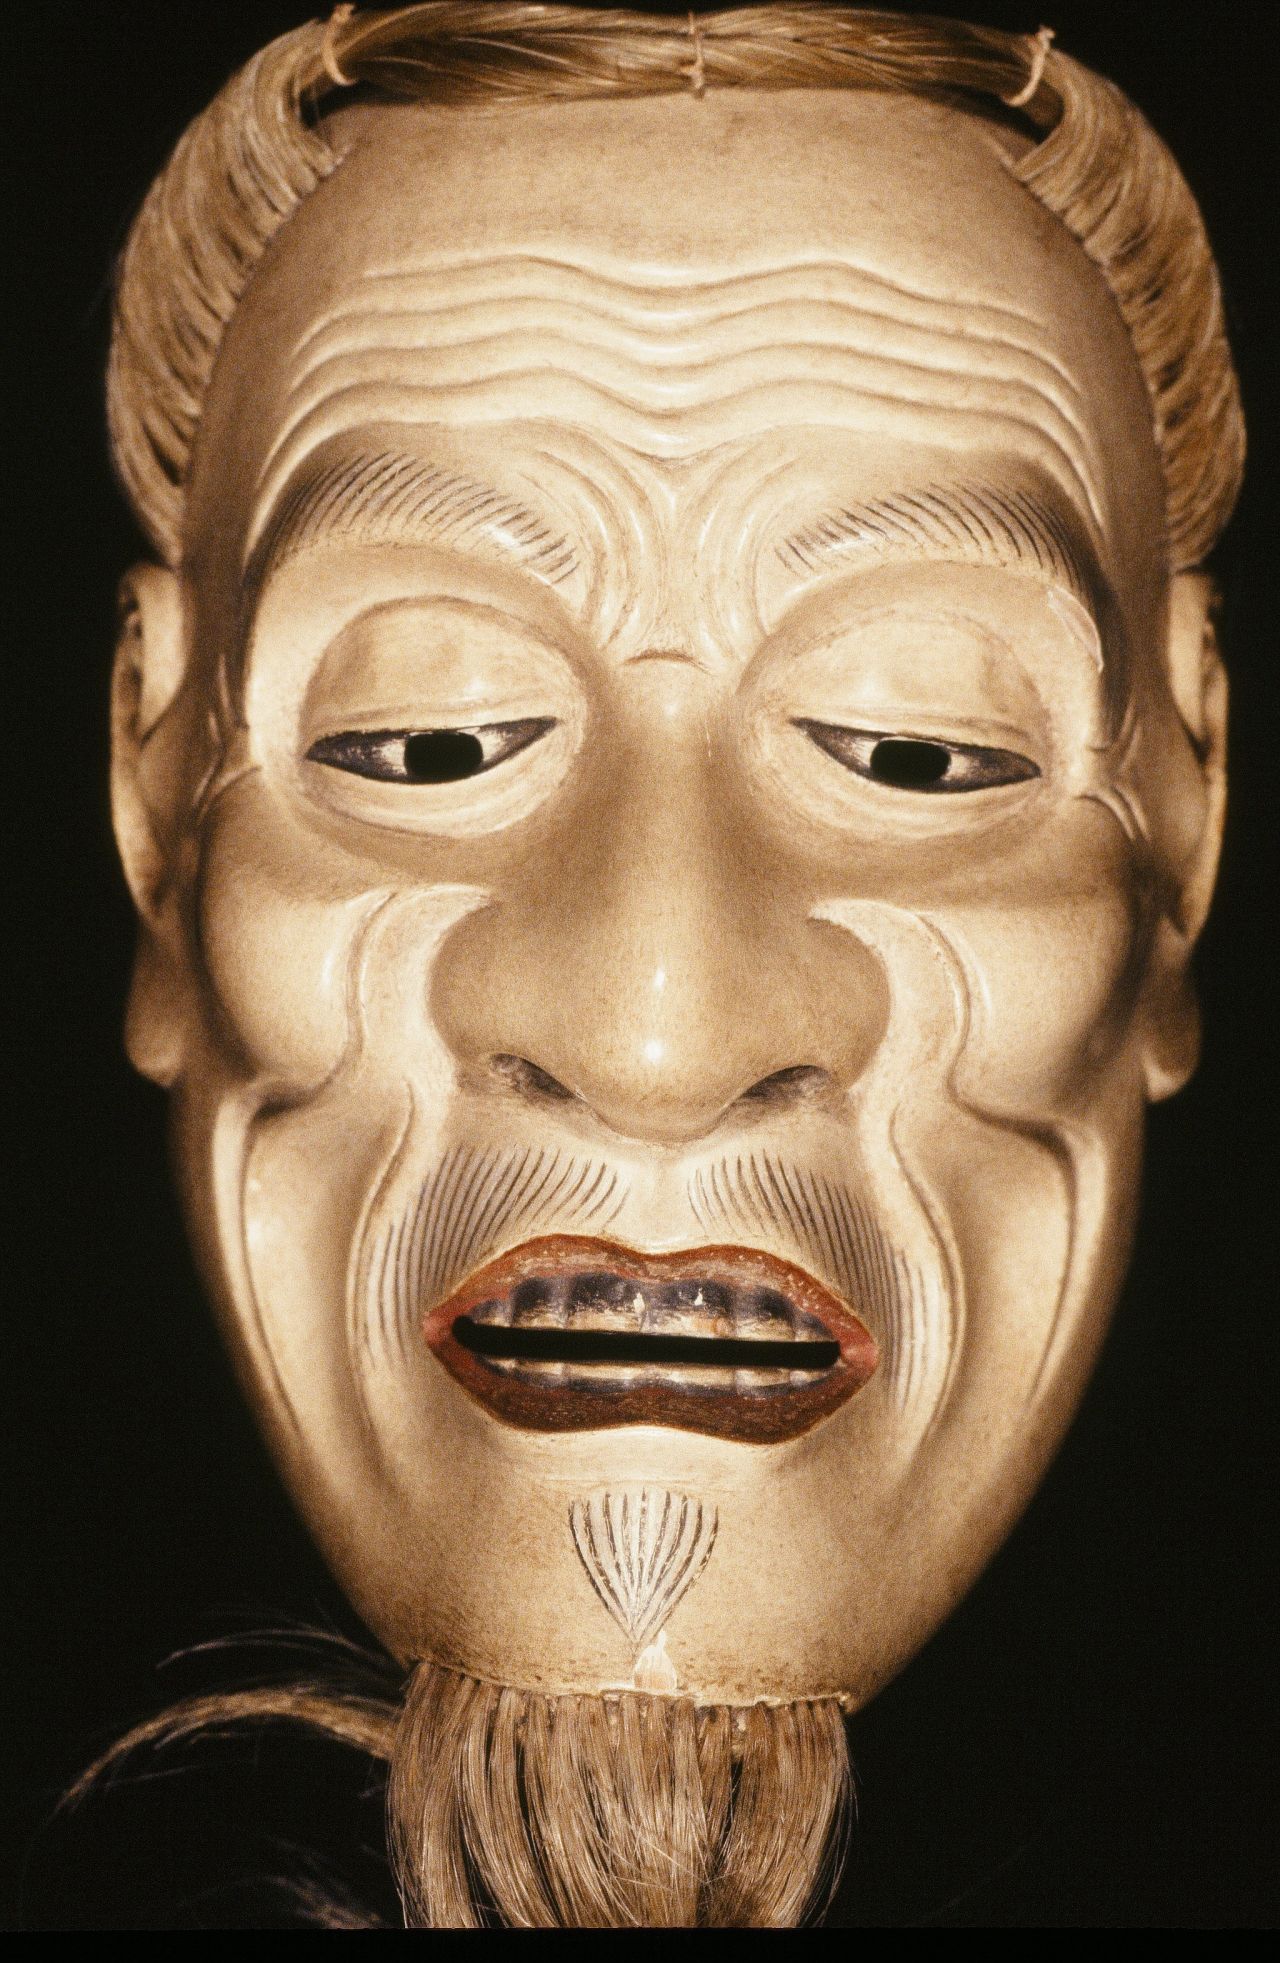 many faces of Japan's 'expressionless' Noh masks | CNN